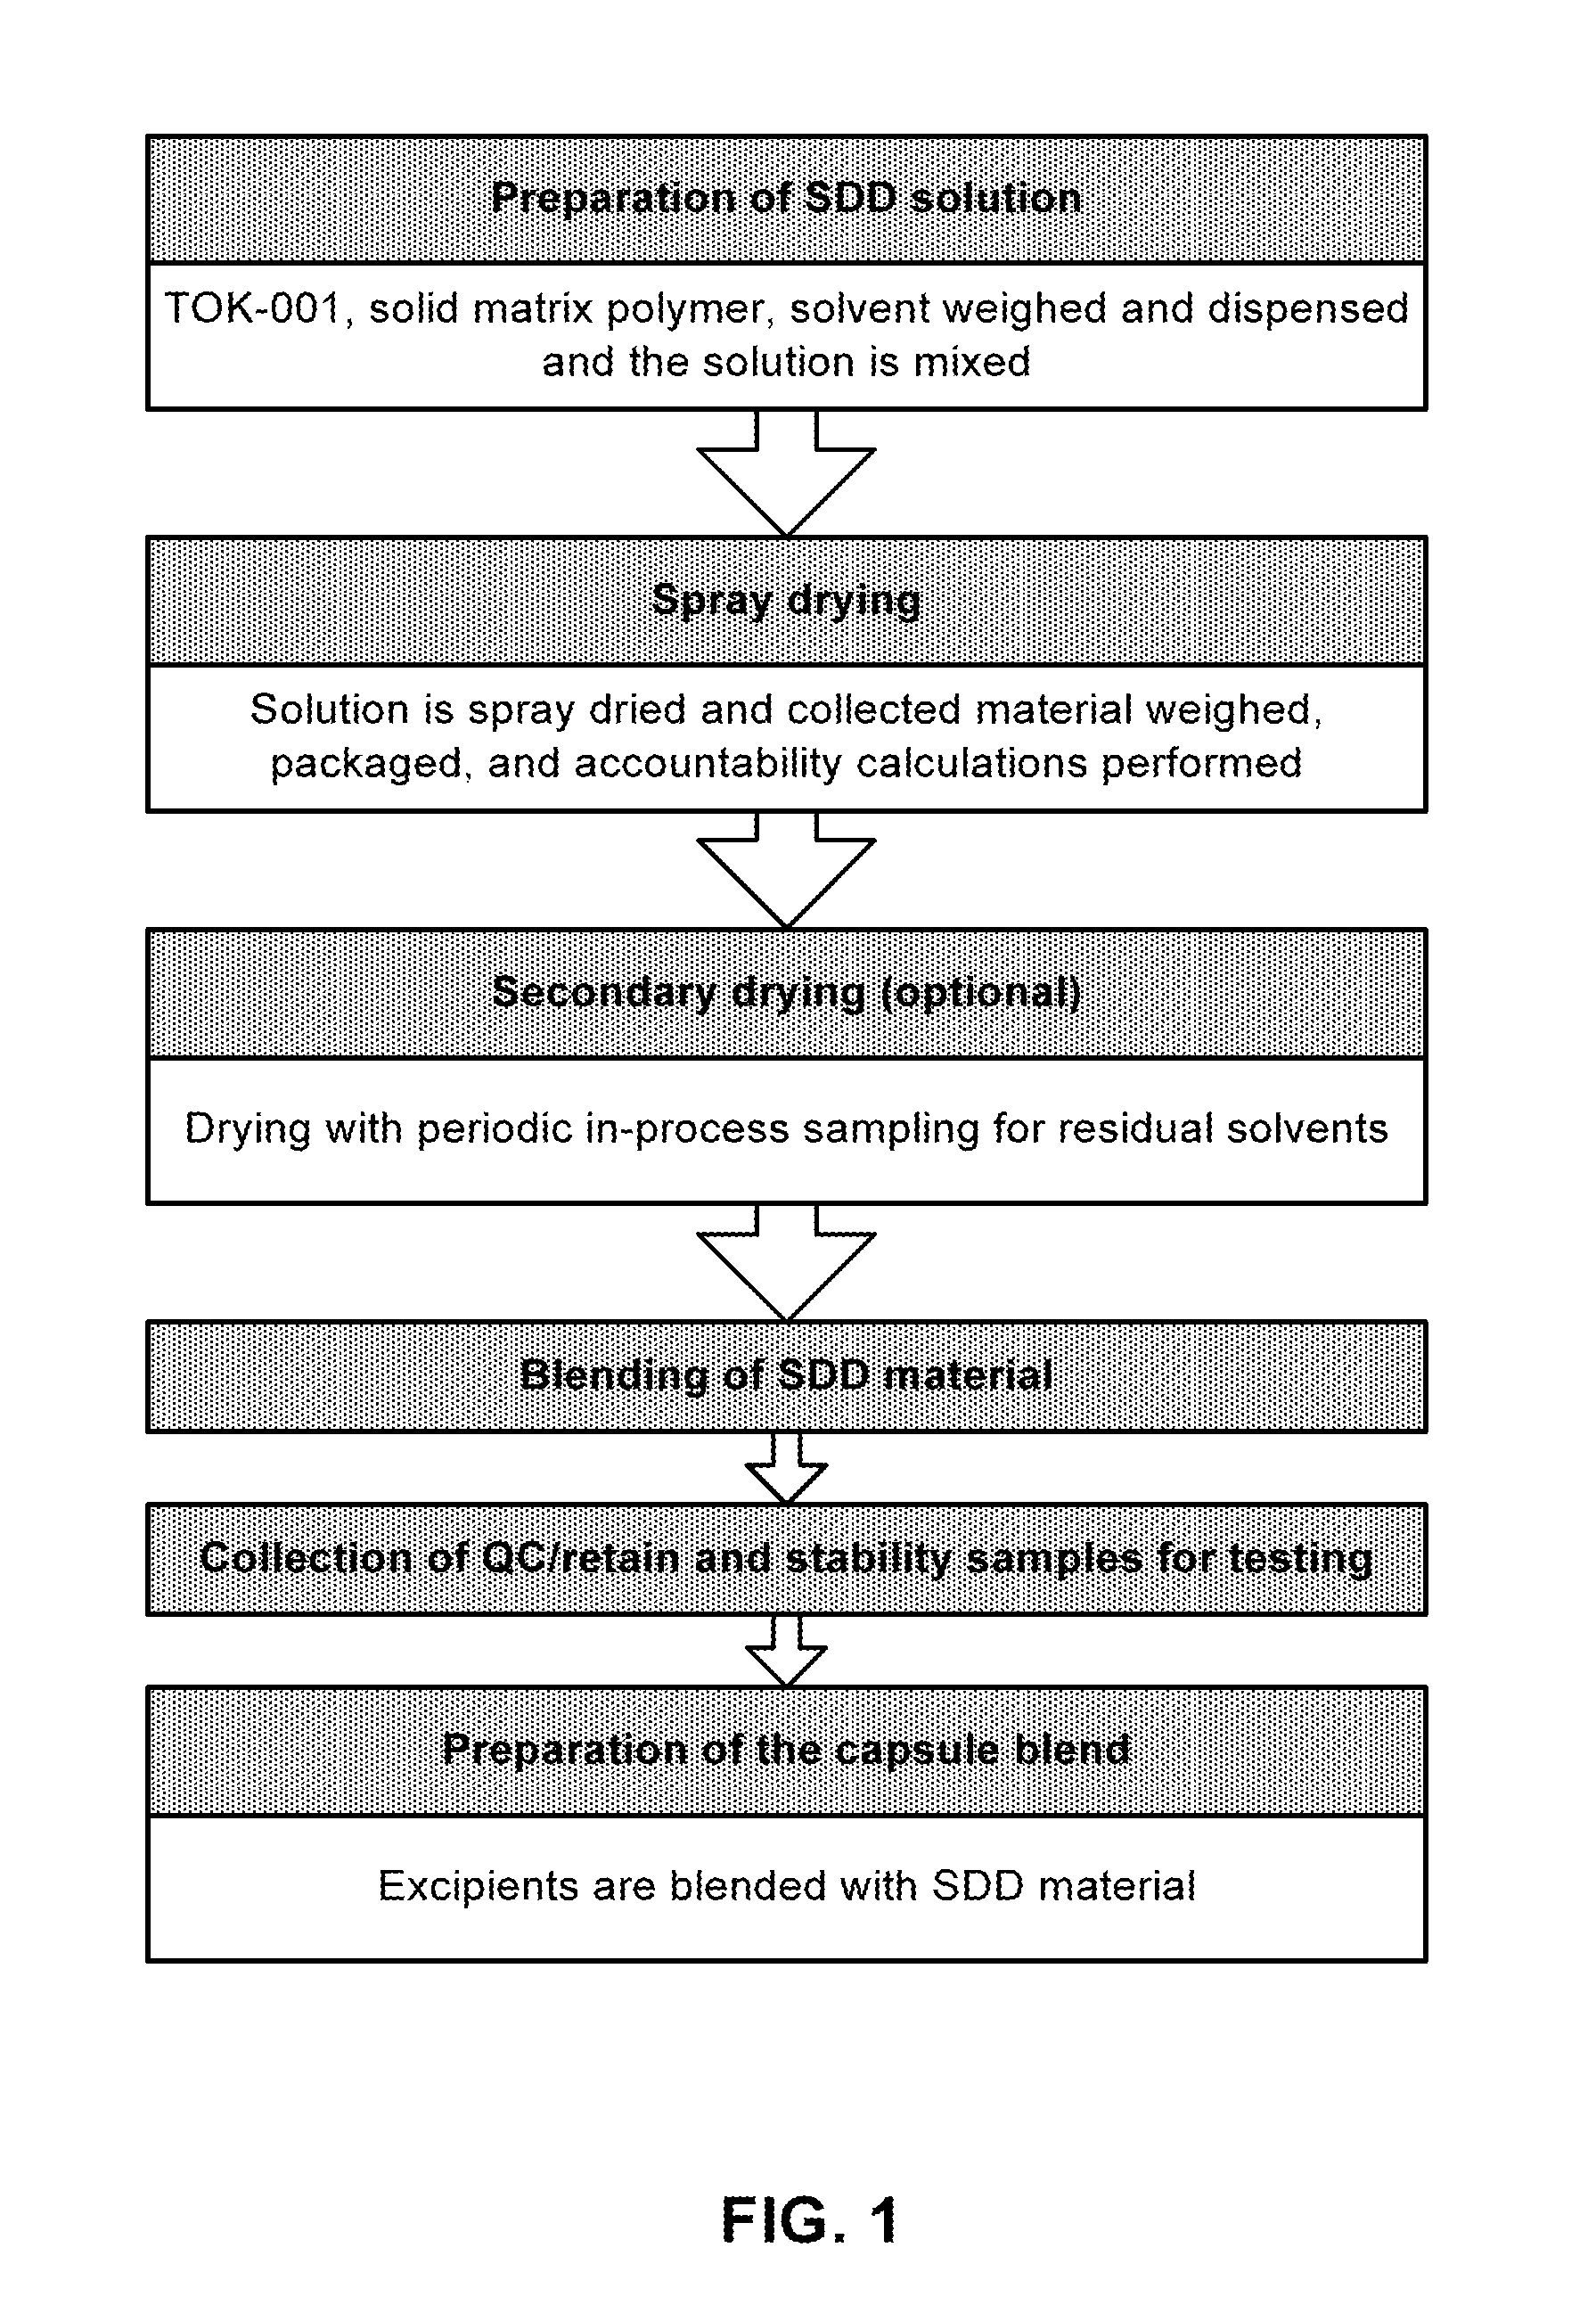 Novel compositions and methods for treating prostate cancer